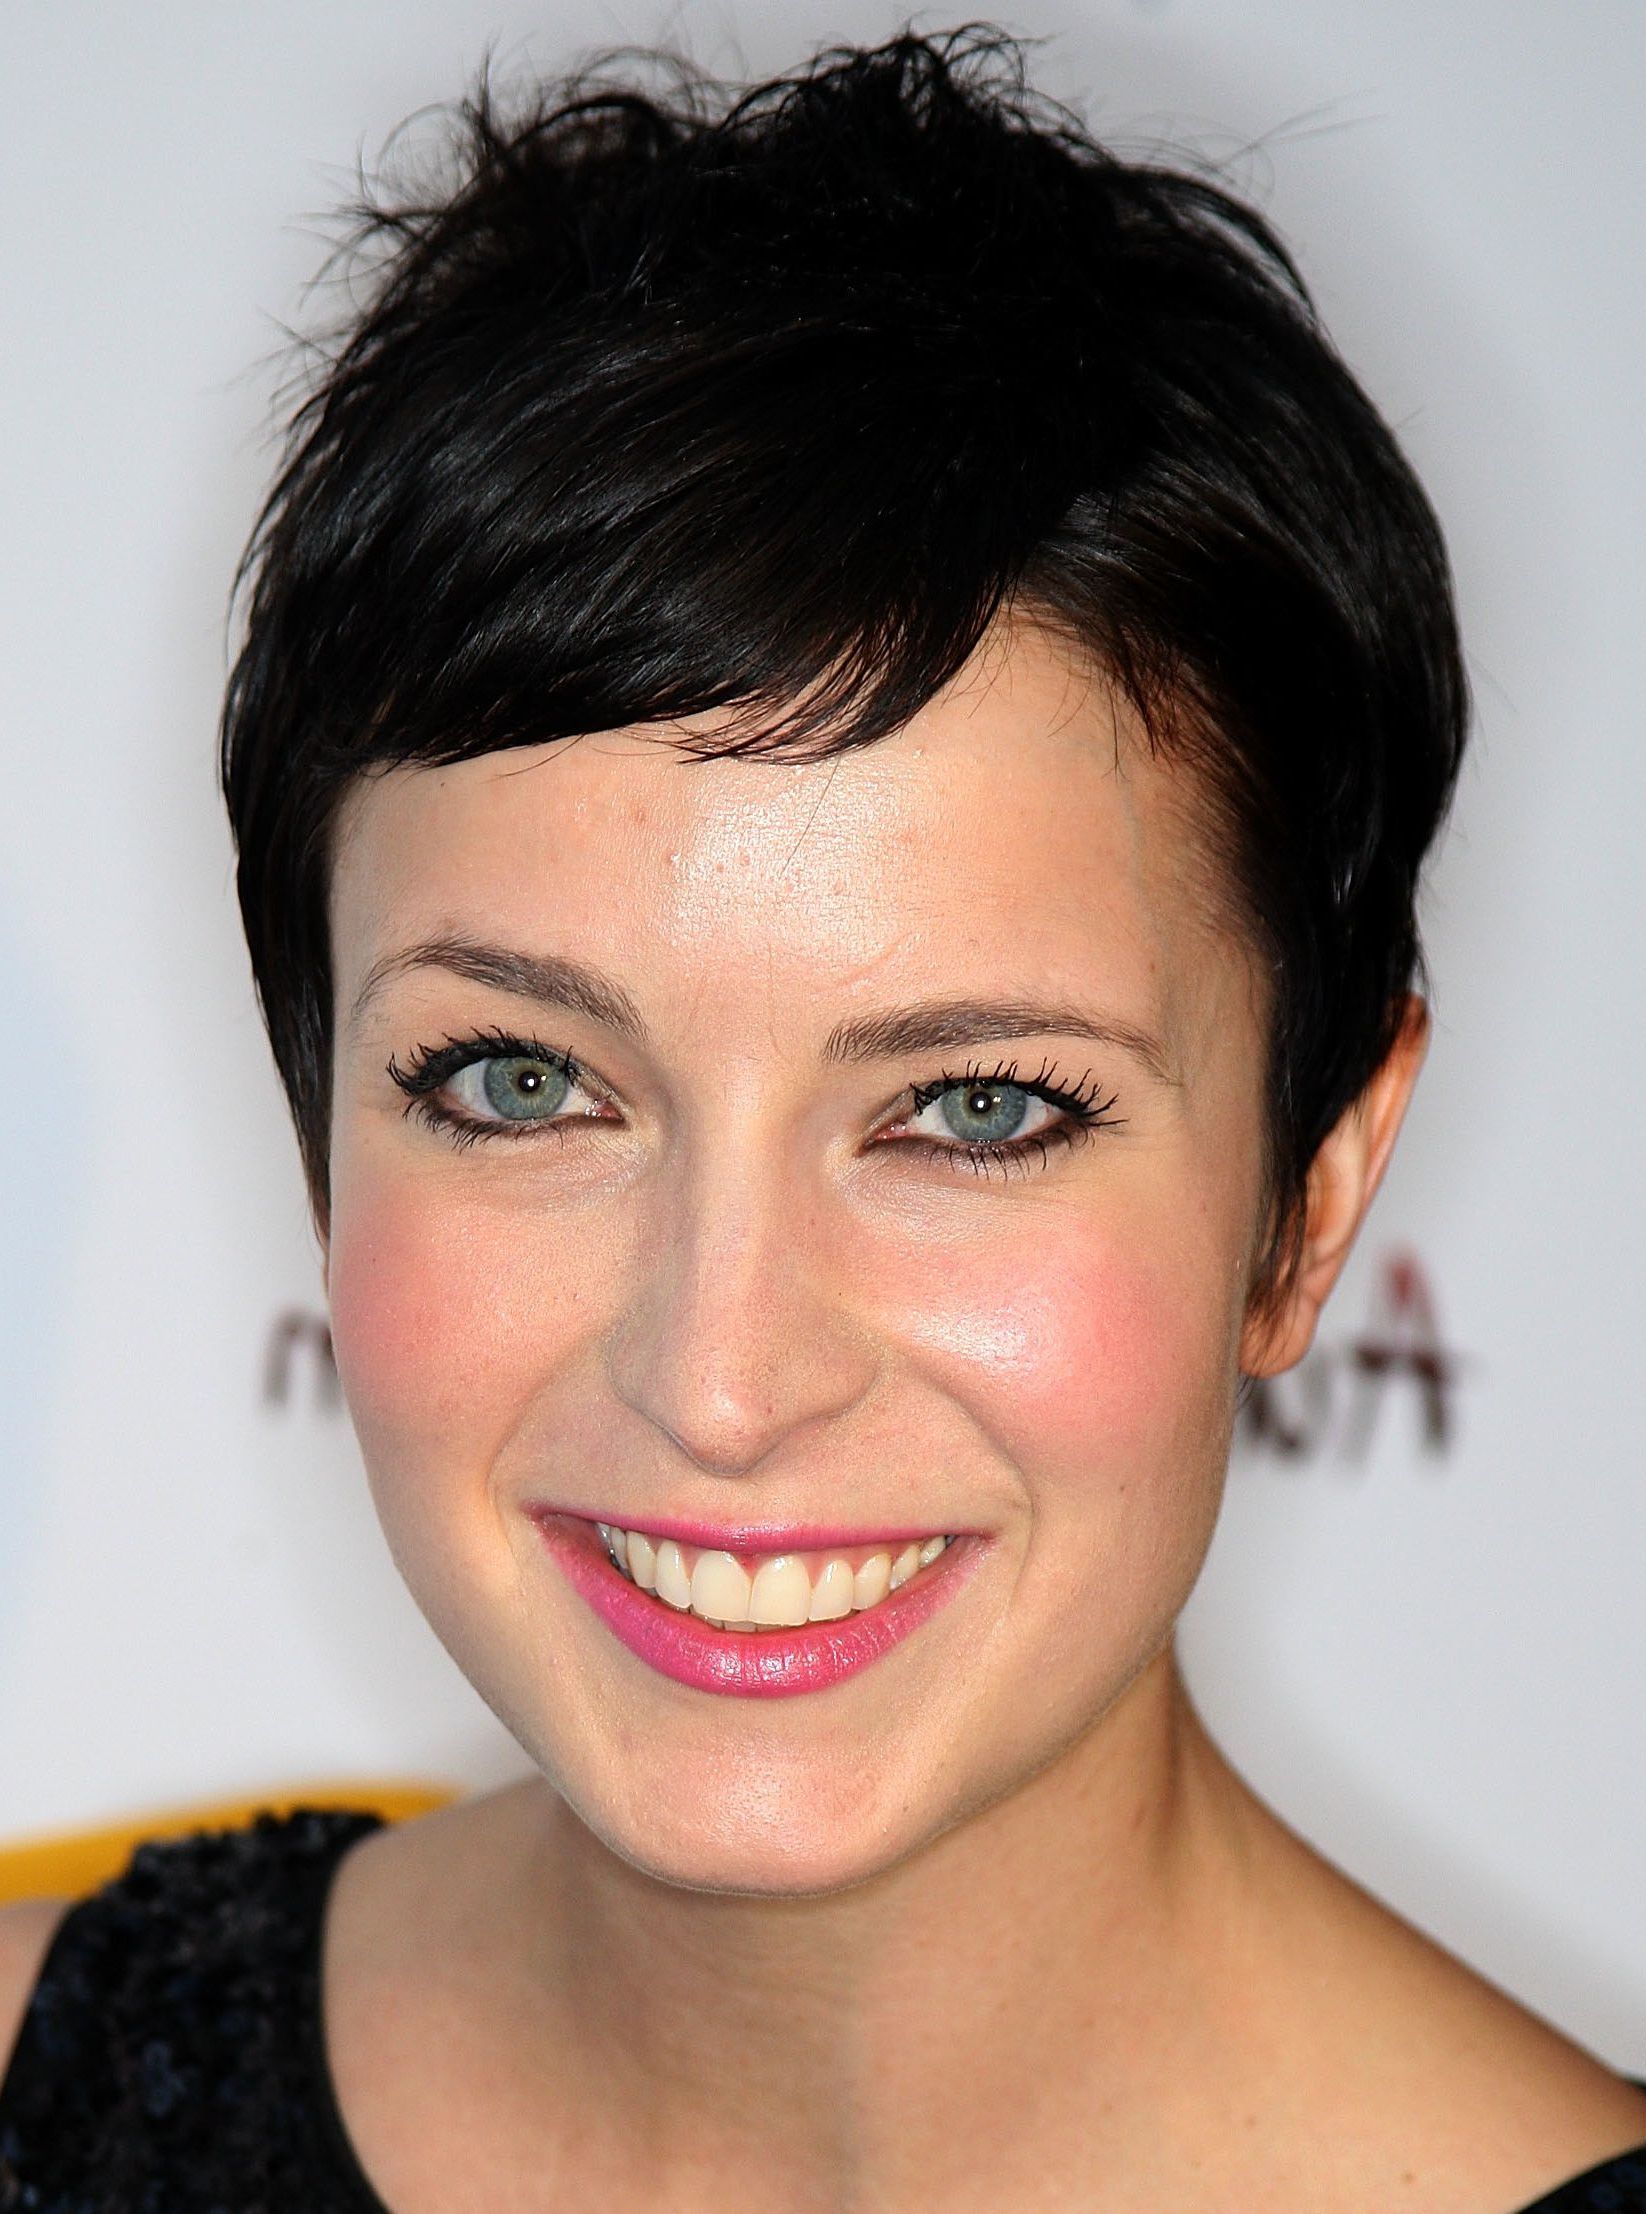 From Pixies To Shags: 18 Great Cuts For Short, Brown Hair With Dramatic Short Hairstyles (View 18 of 25)